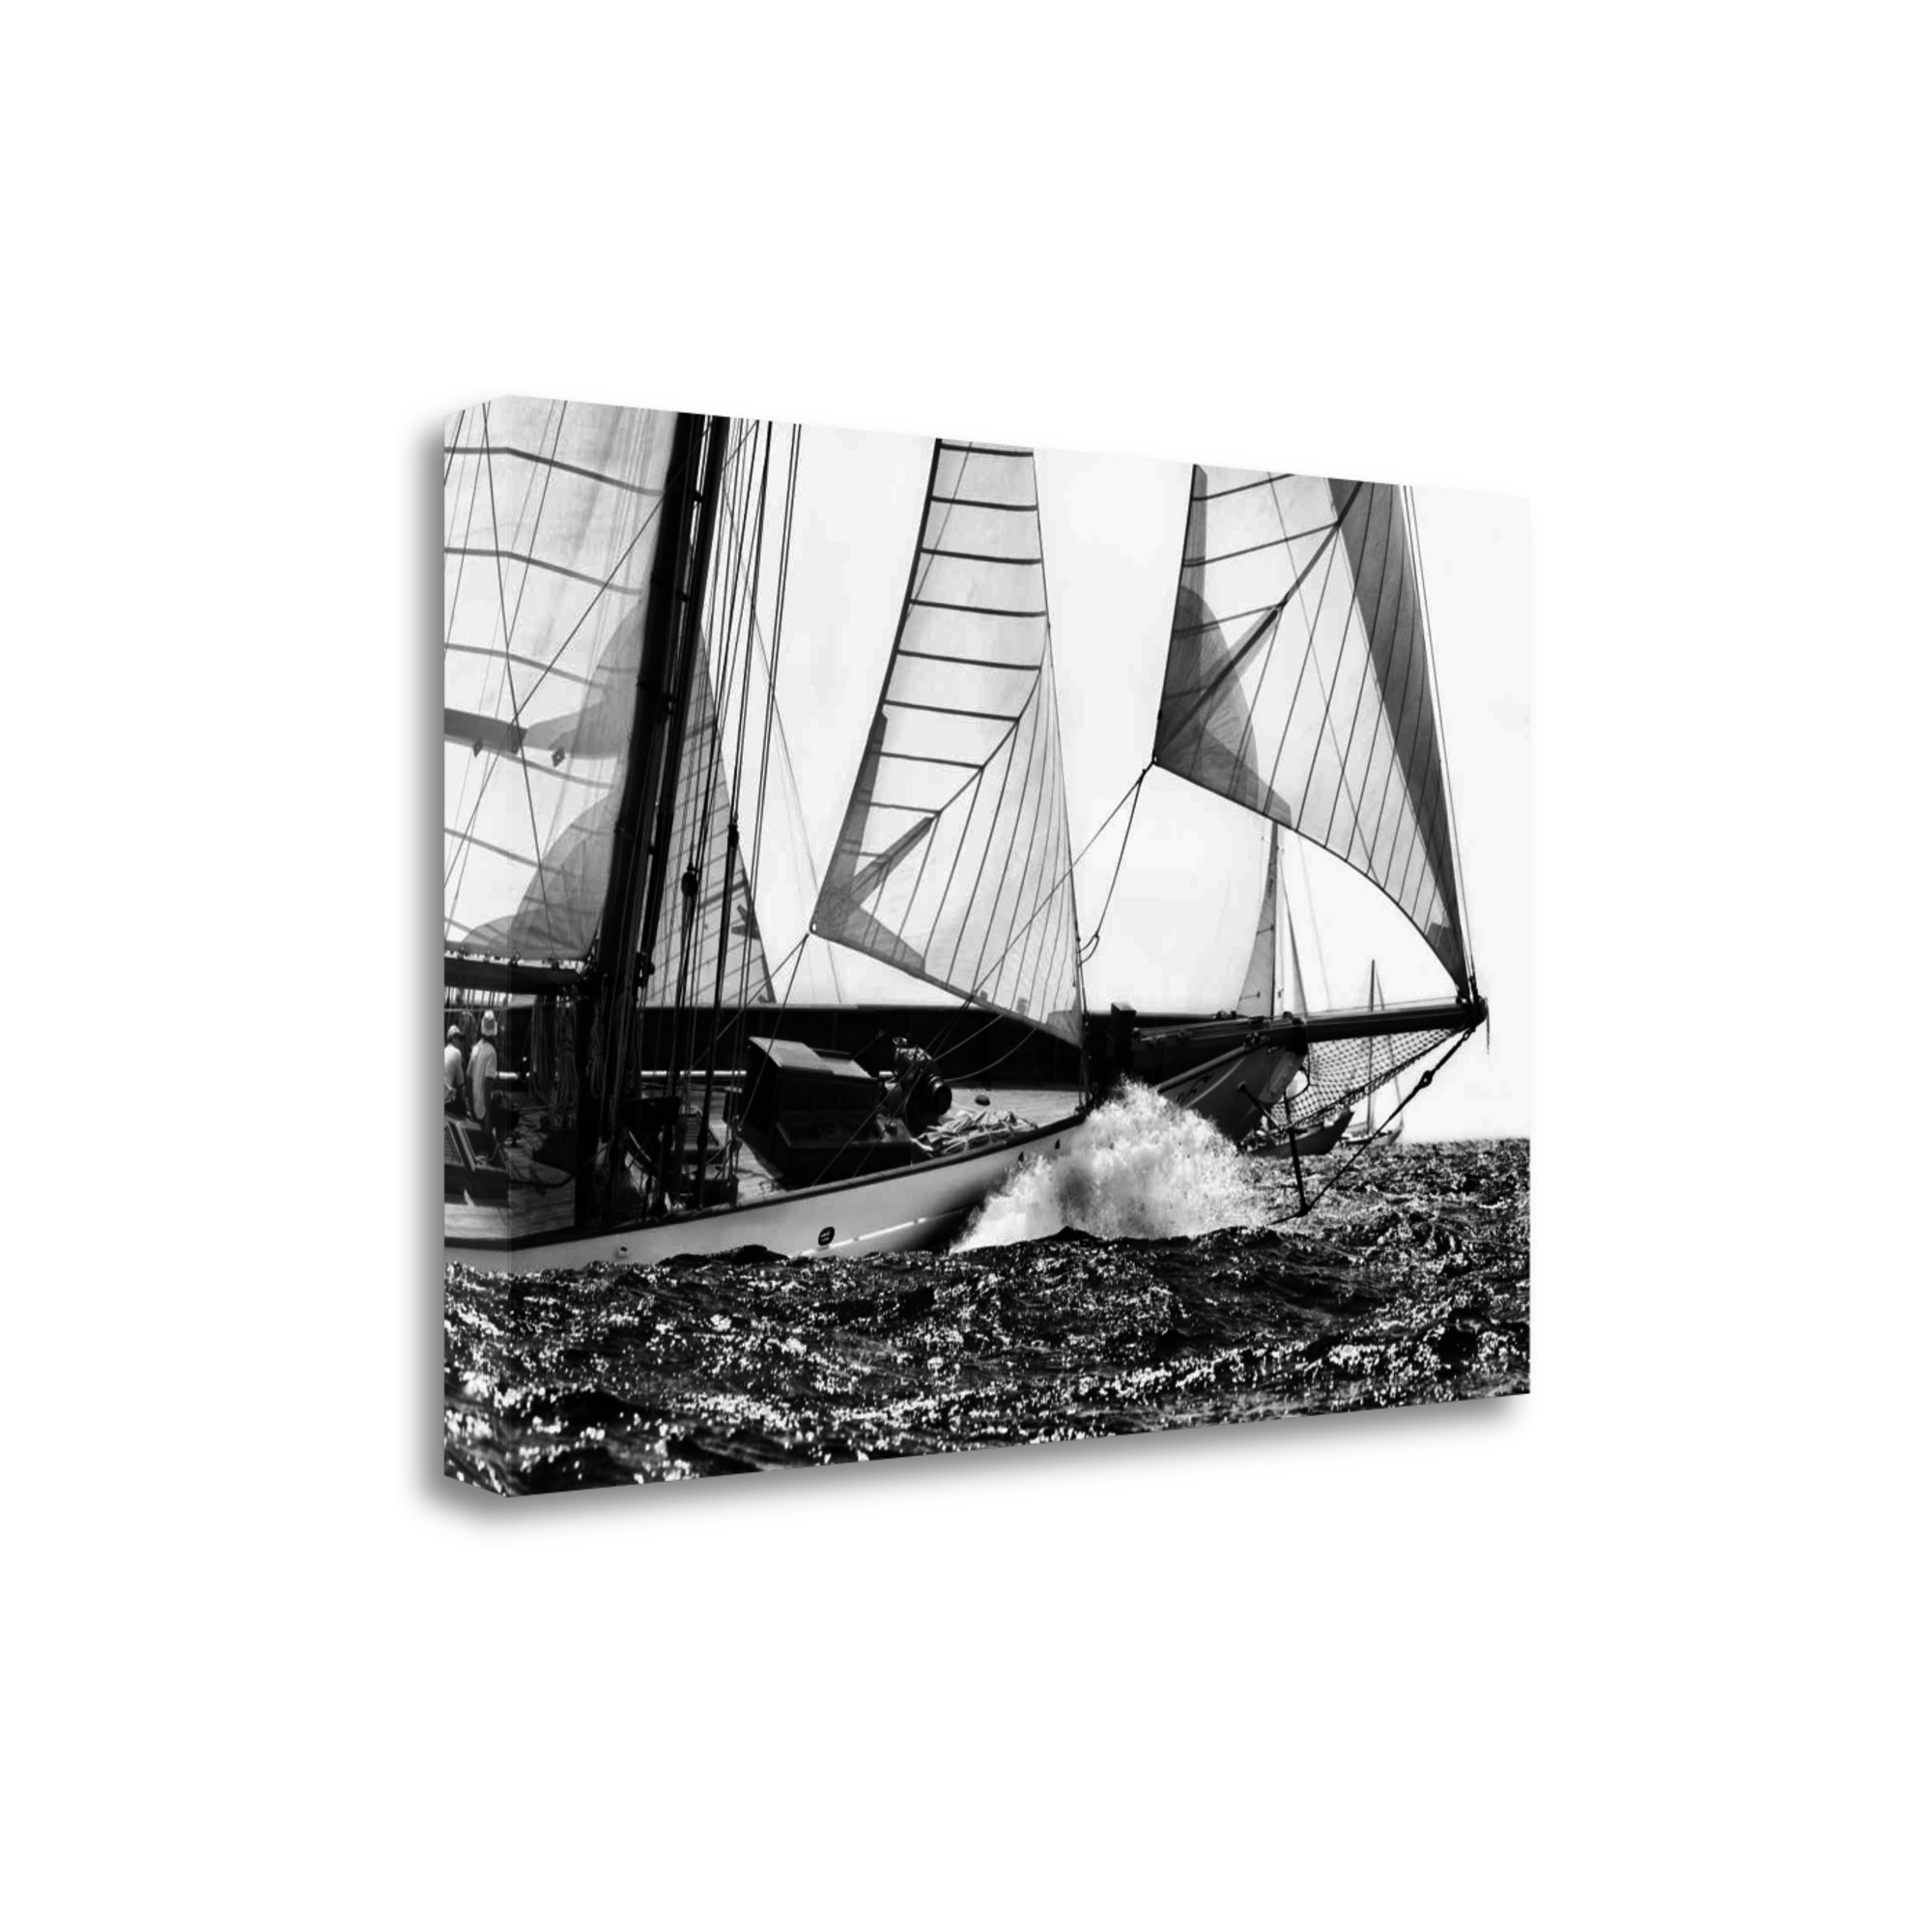 Black and White Sailing Yacht 5 Giclee Wrap Canvas Wall Art